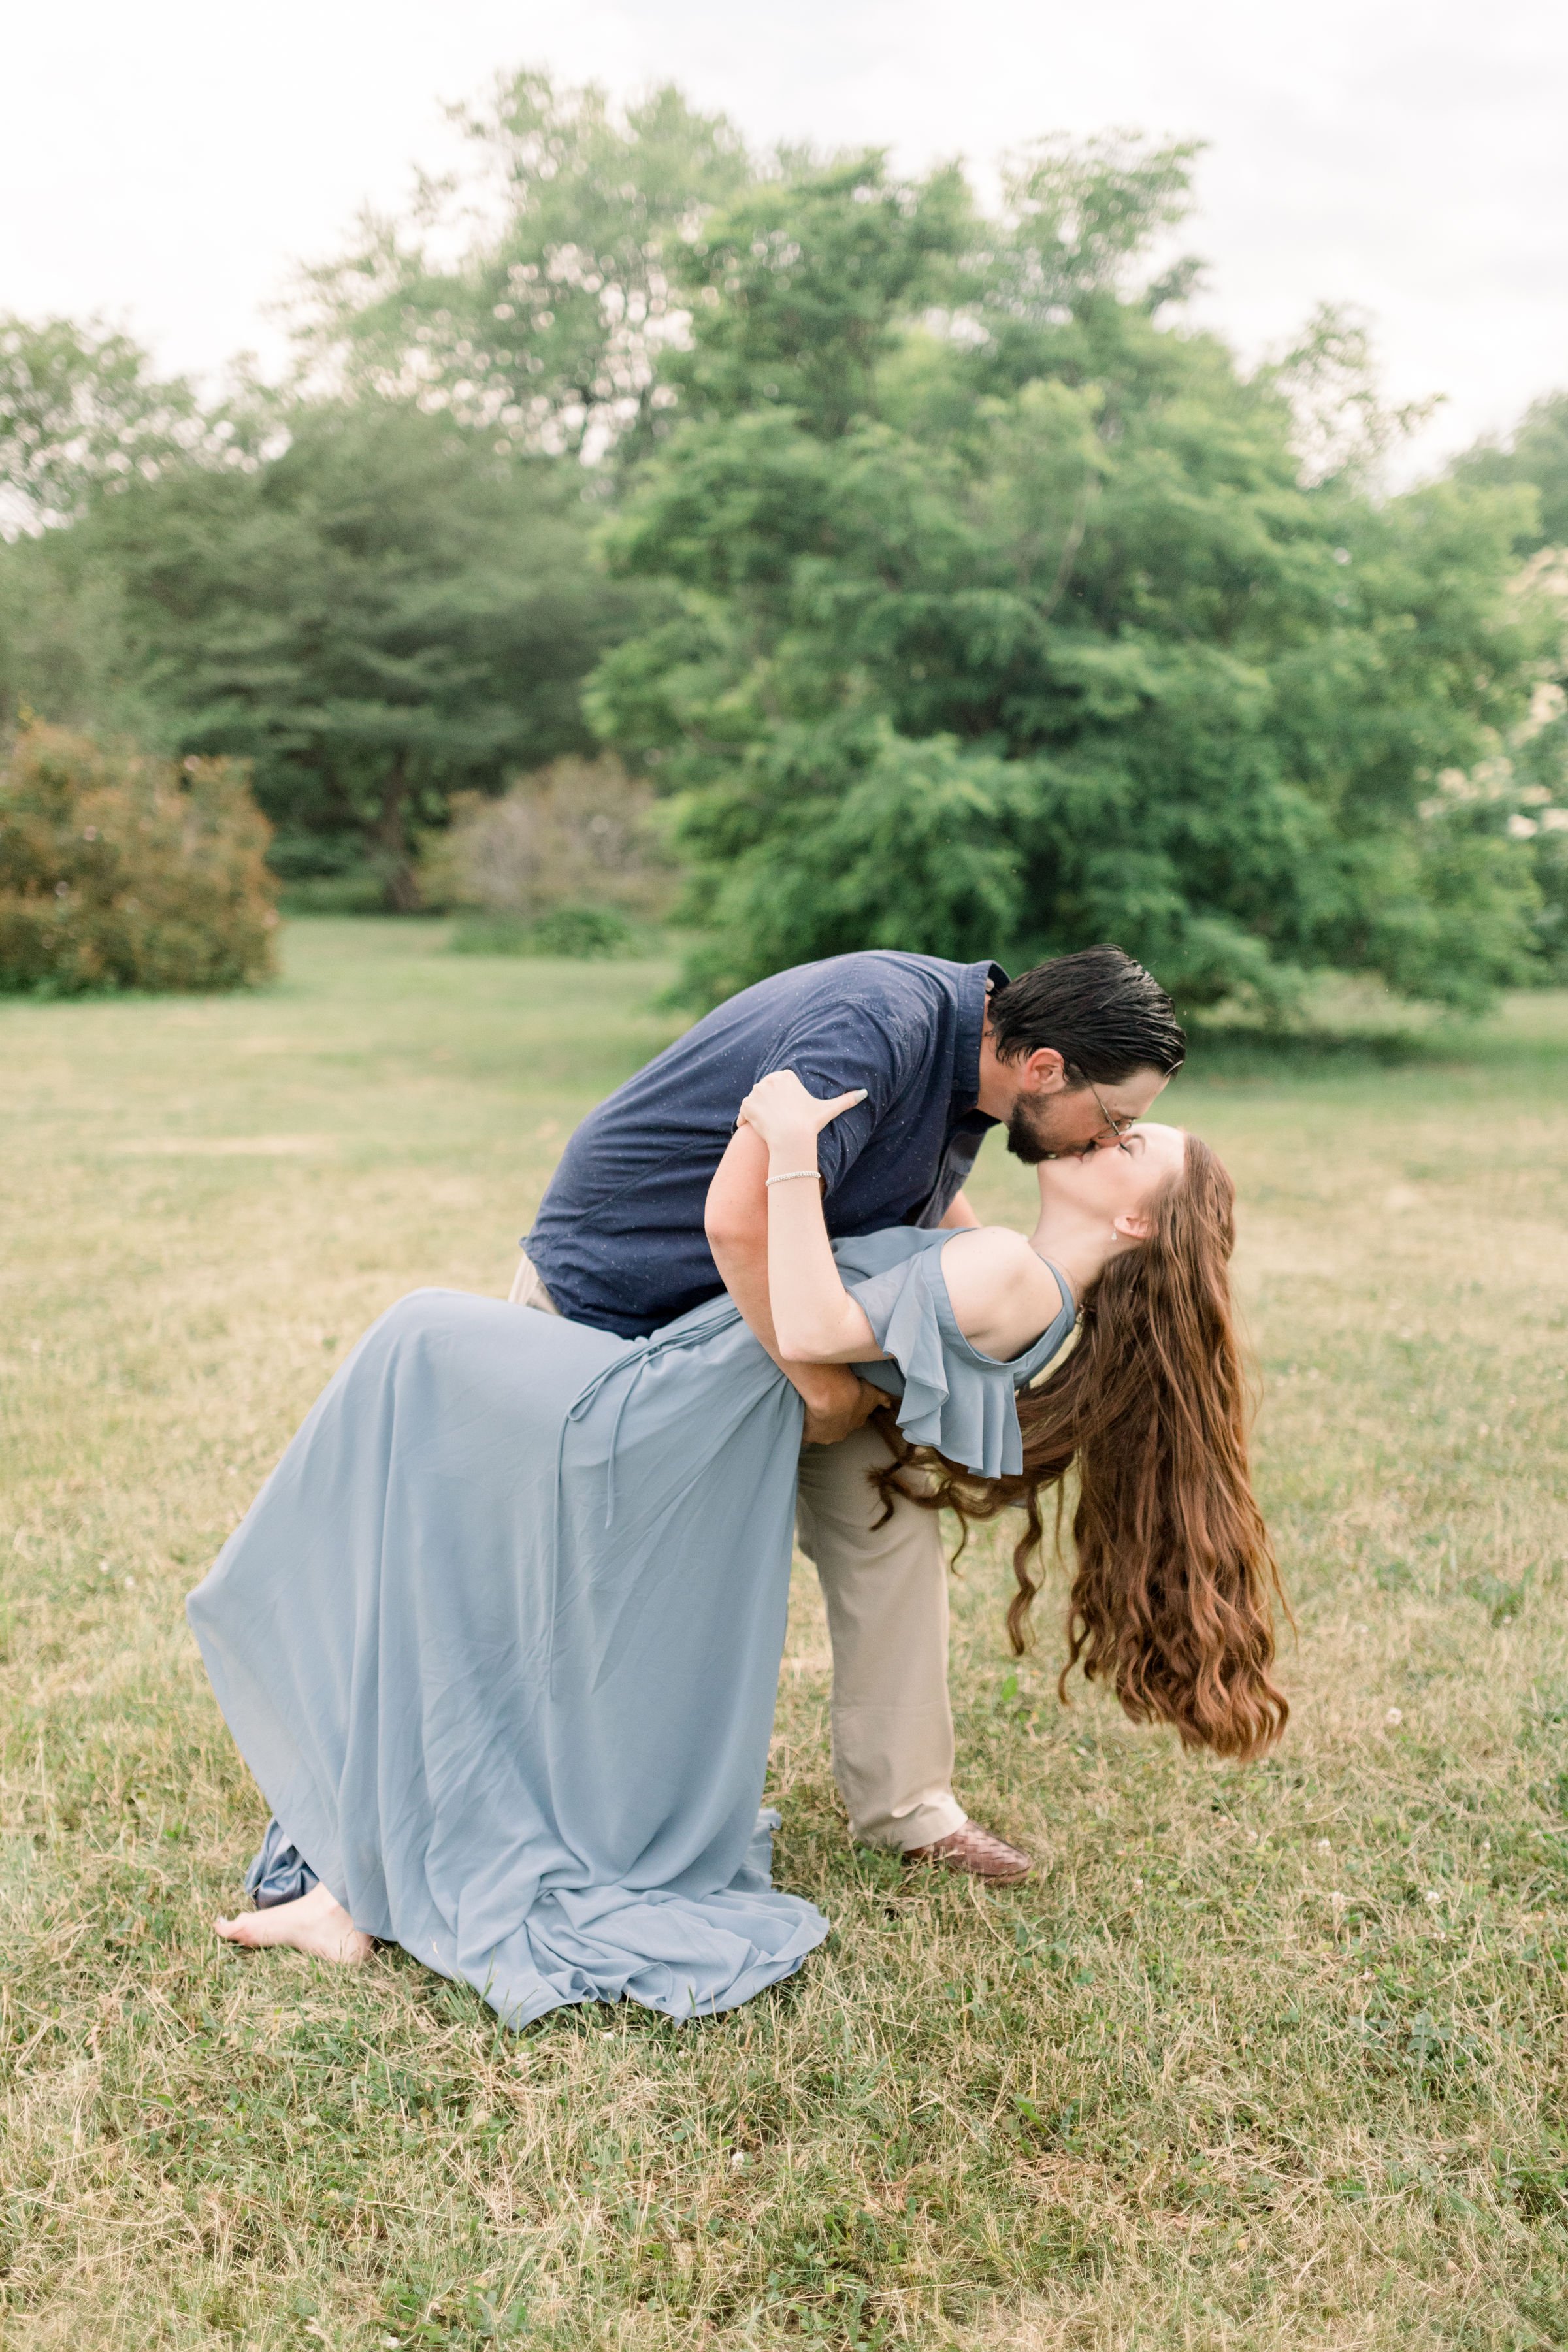  Summertime engagement photography in the mountains by Chelsea Mason Photography an Ottawa engagement photographer. mountain summer photography #chelseamasonphotography #chelseamasonengagements #Ottawaengagement #DominonArboretum #OttawaPhotographers